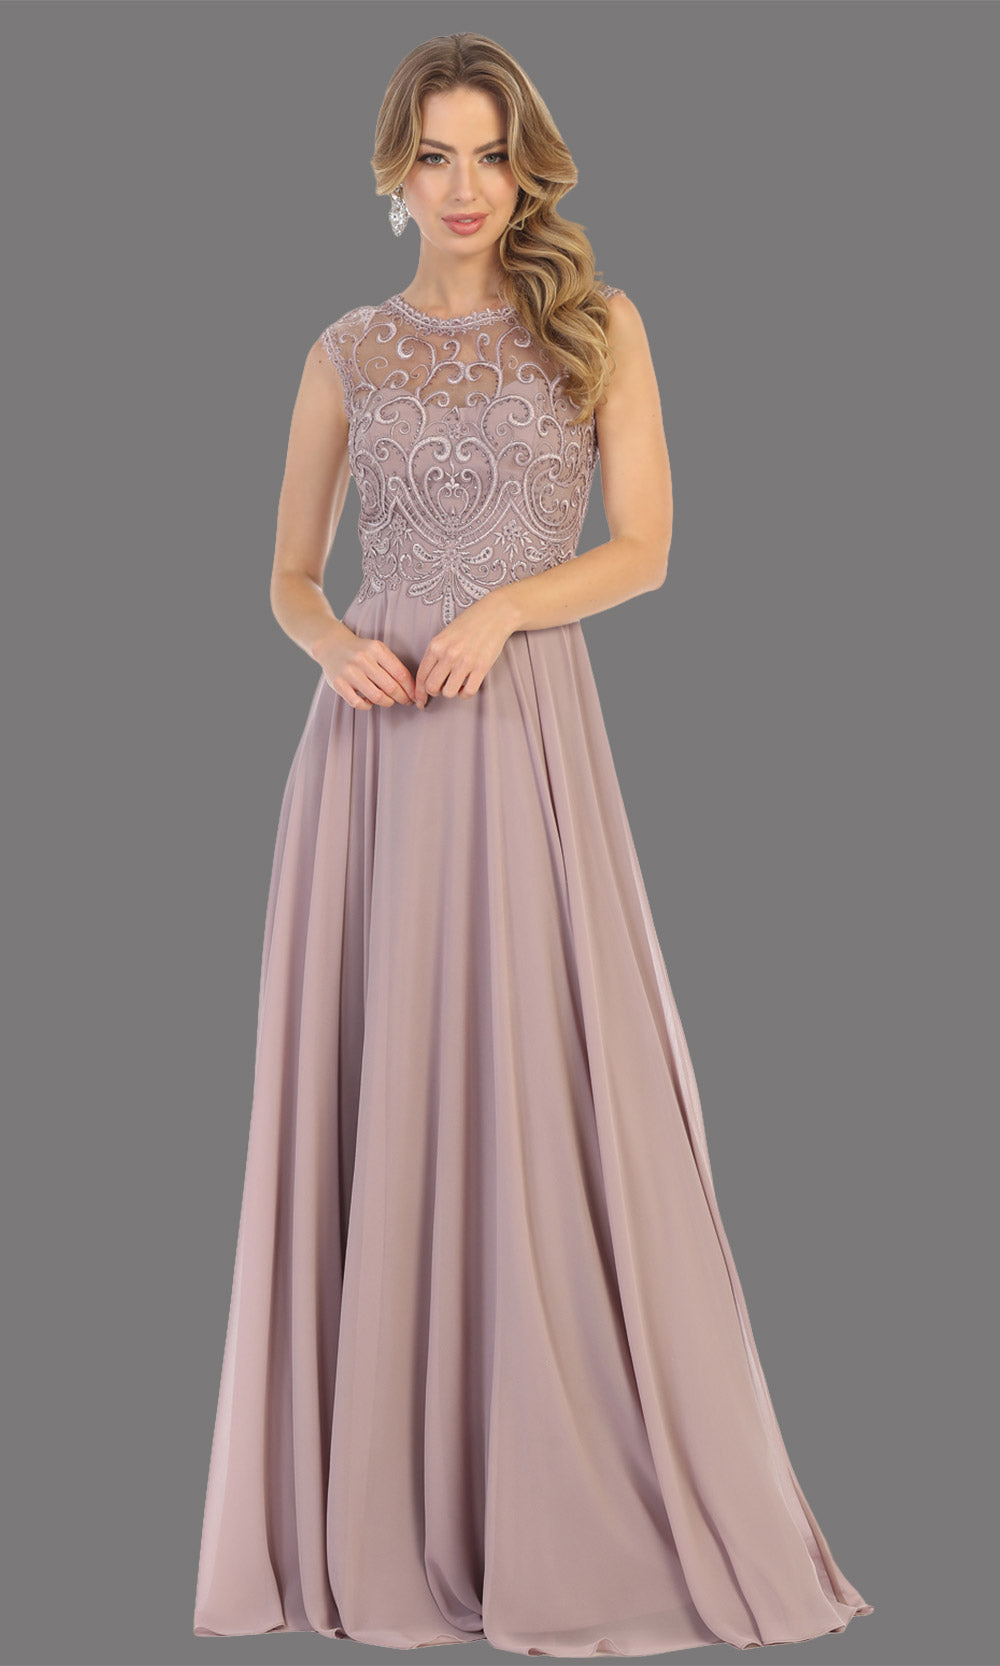 Mayqueen MQ1707 long mauve flowy dress with high neck & high back. This dusty rose dress is perfect for bridesmaid dresses, simple wedding guest dress, prom dress, gala, black tie wedding. Plus sizes are available, evening party dress.jpg